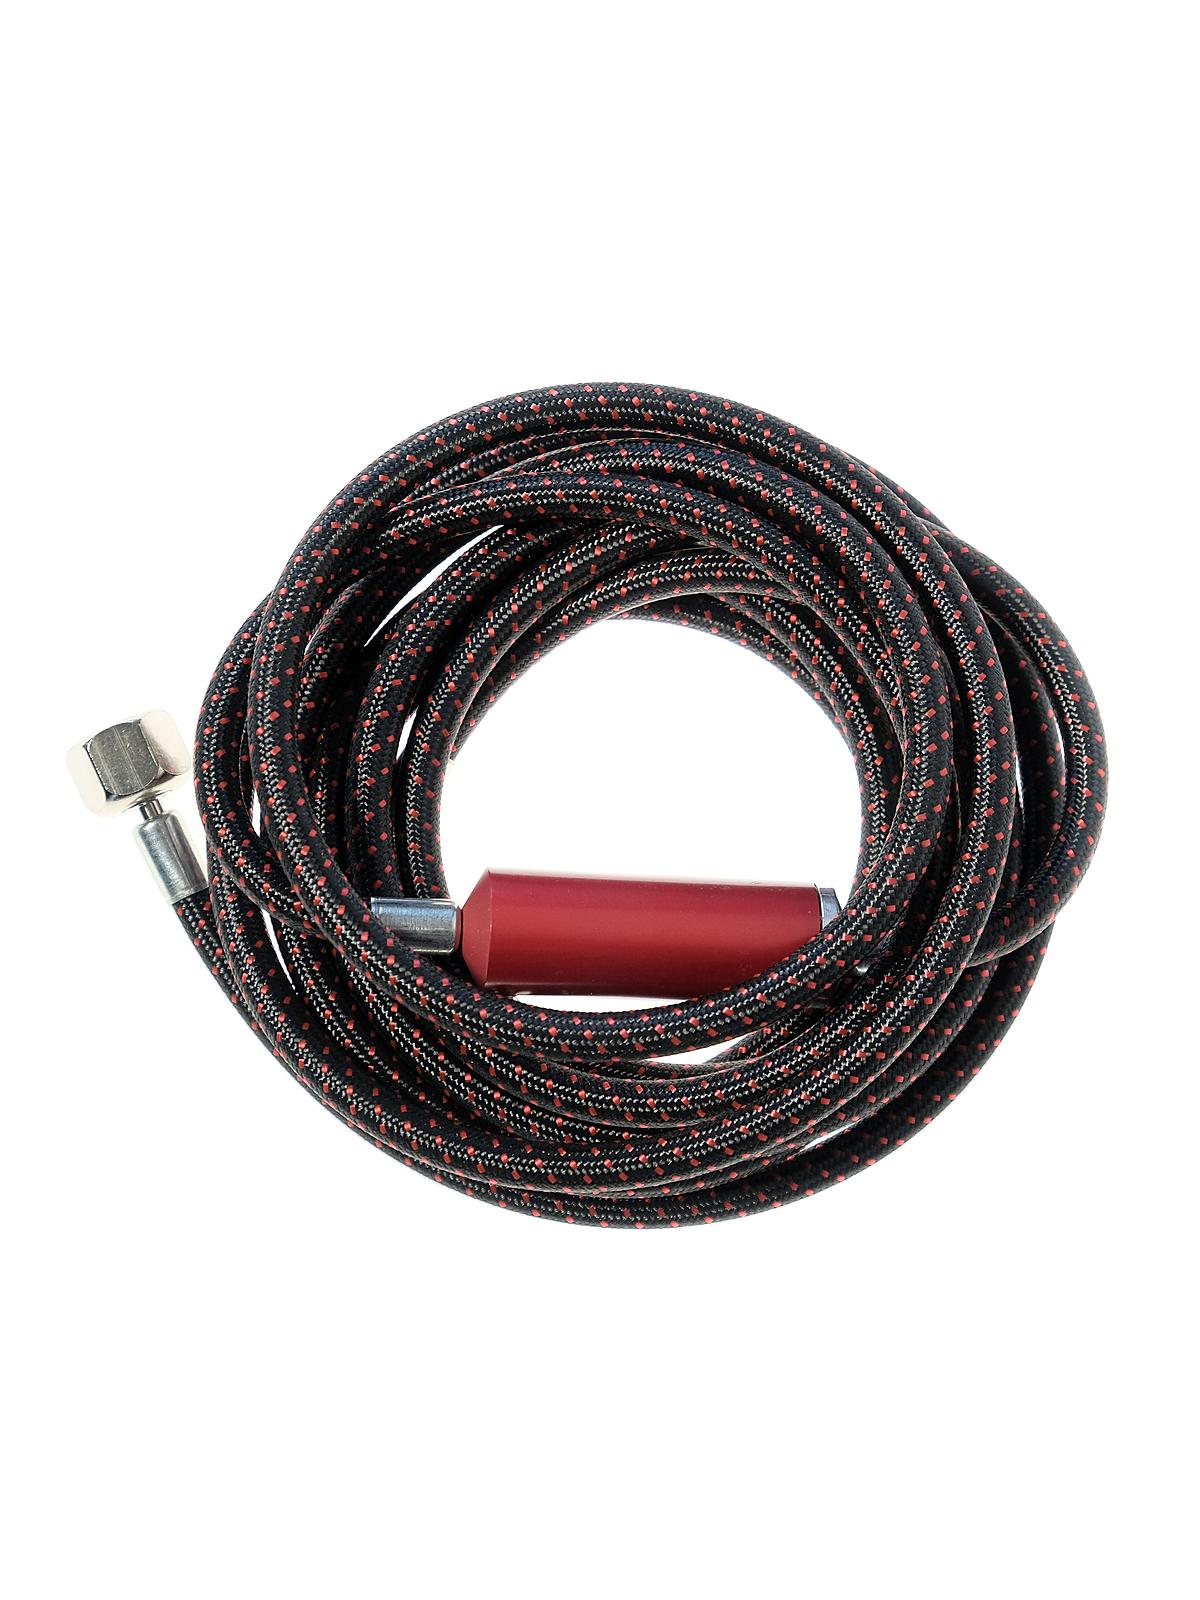 Air Hose With Moisture Trap 10 ft. x 1 8 in.